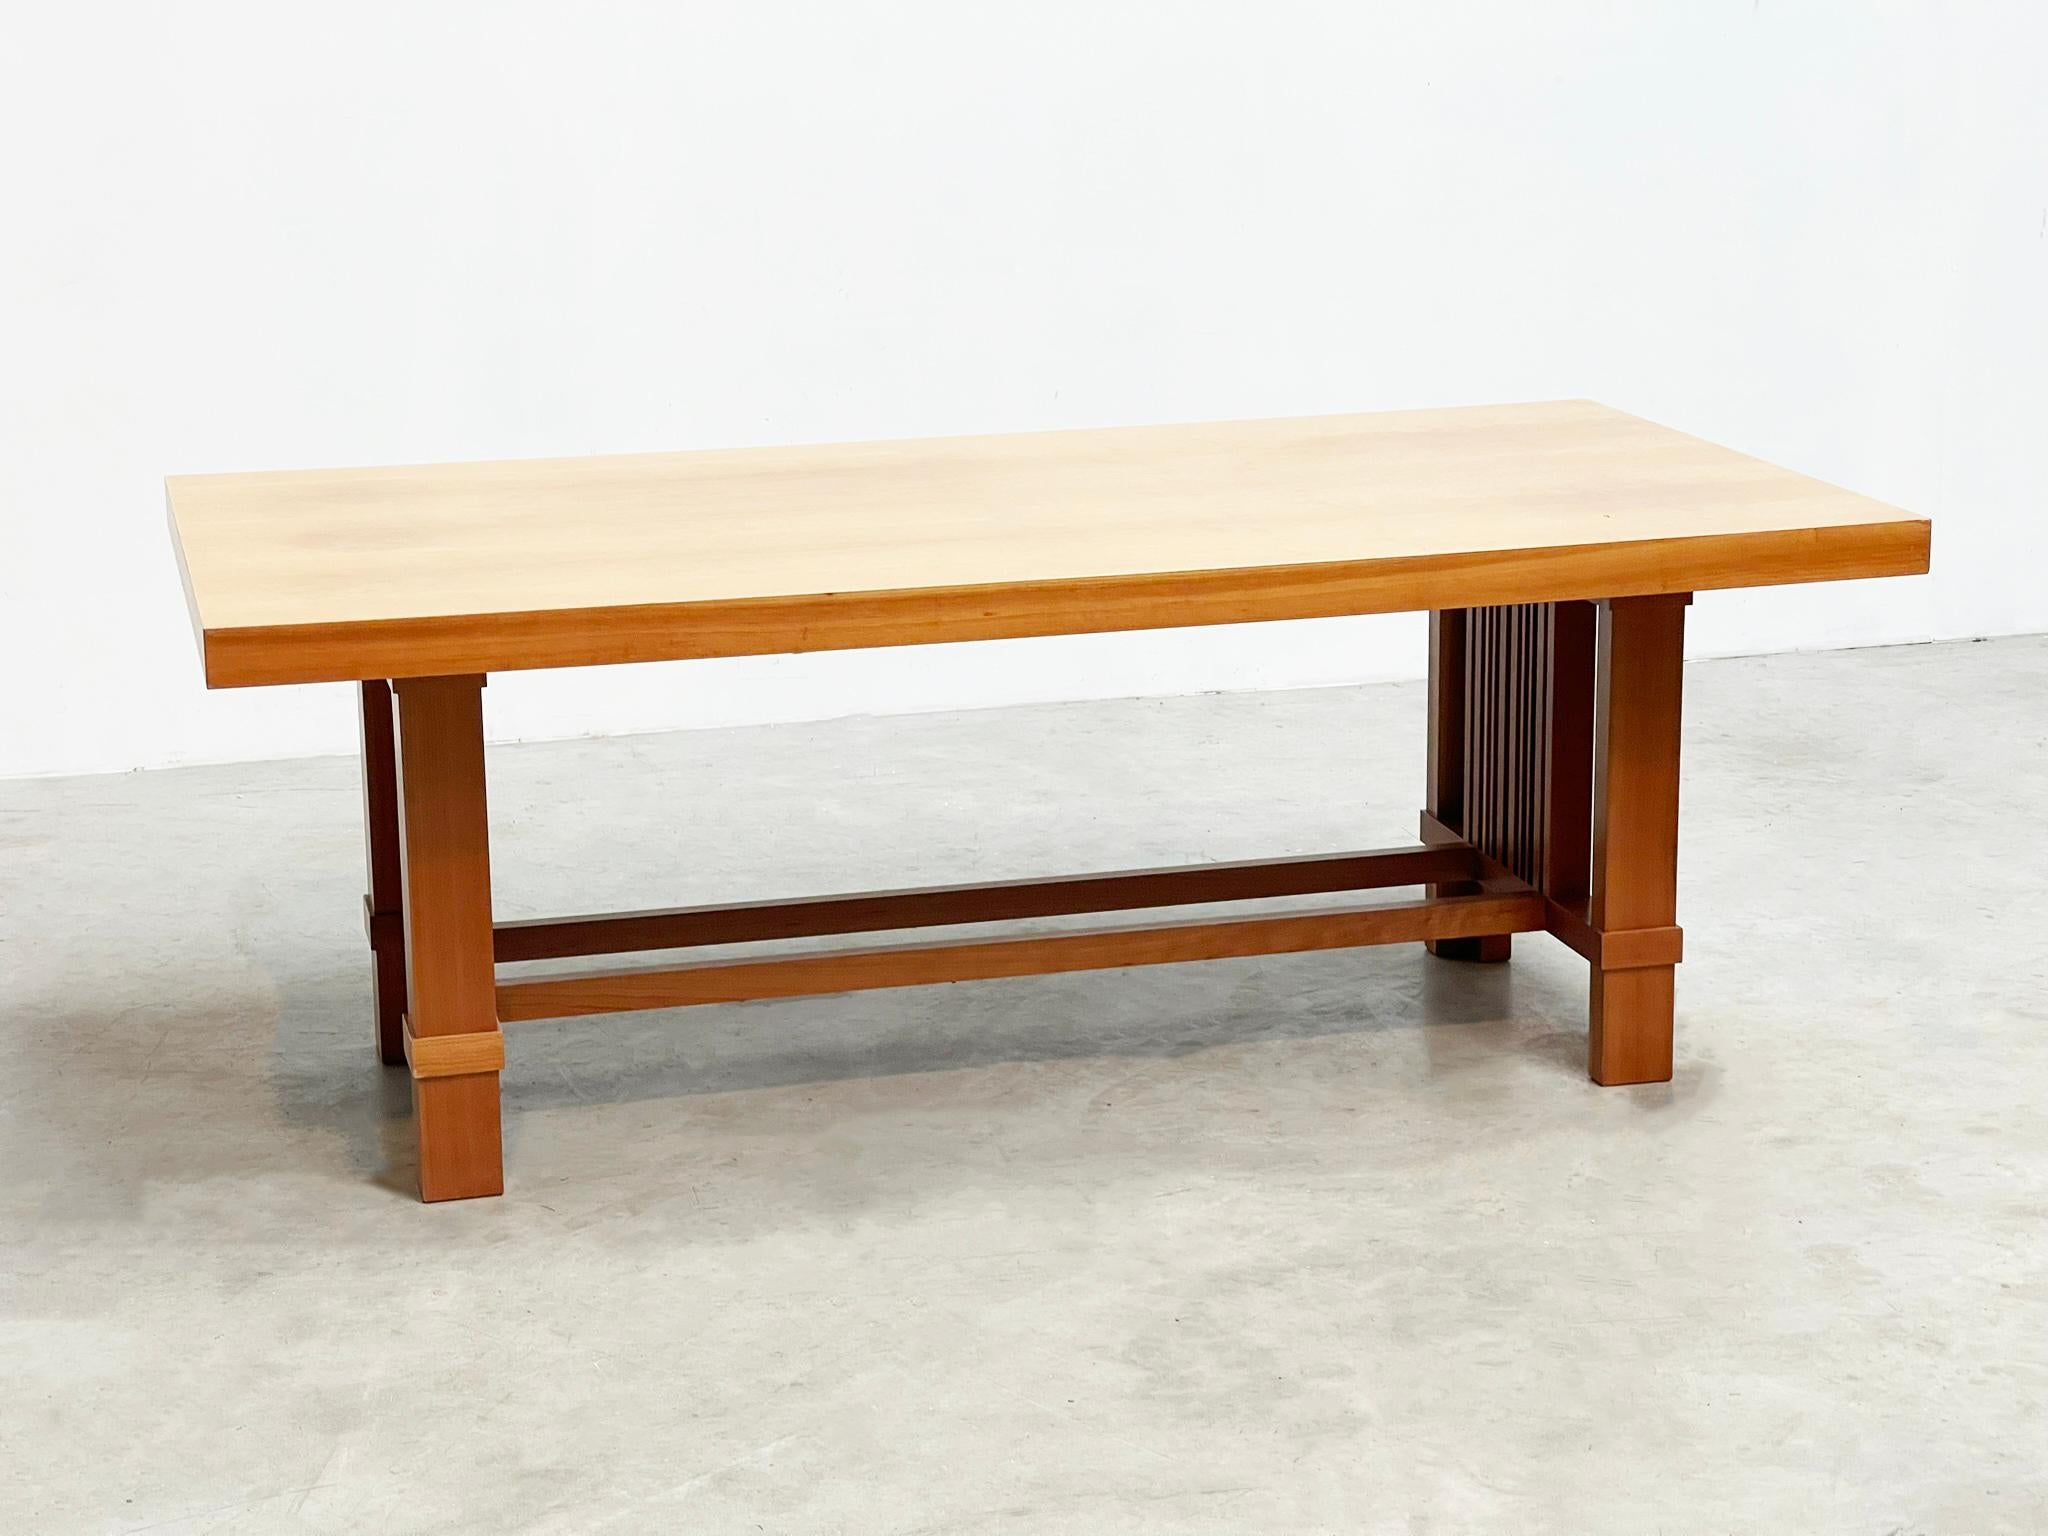 Italian Frank Lloyd Wright “608 Taliesin” Dining Table signed by Cassina, 1986 For Sale